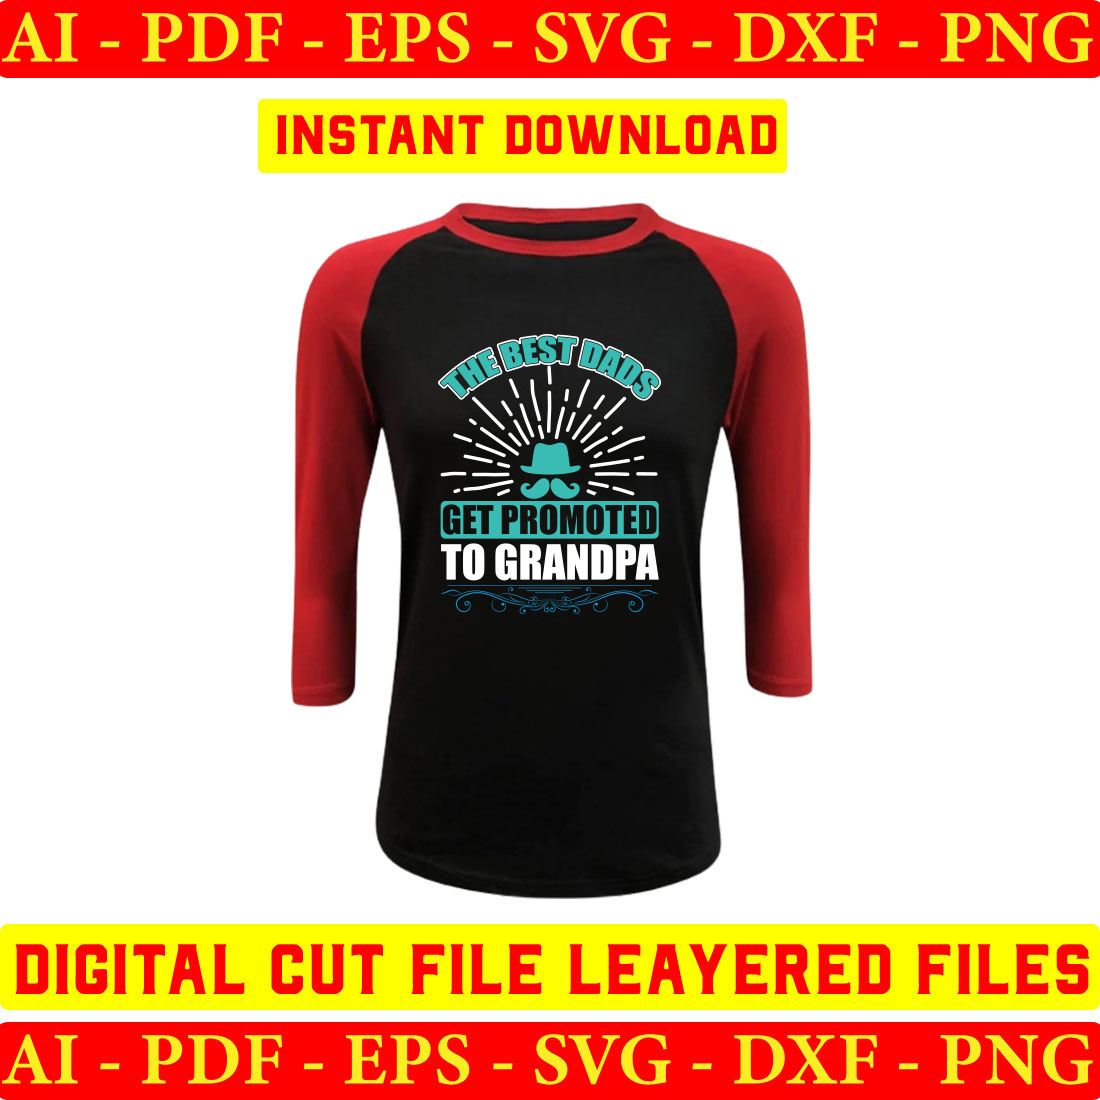 Black and red baseball shirt with the words get promotion to grandpa.